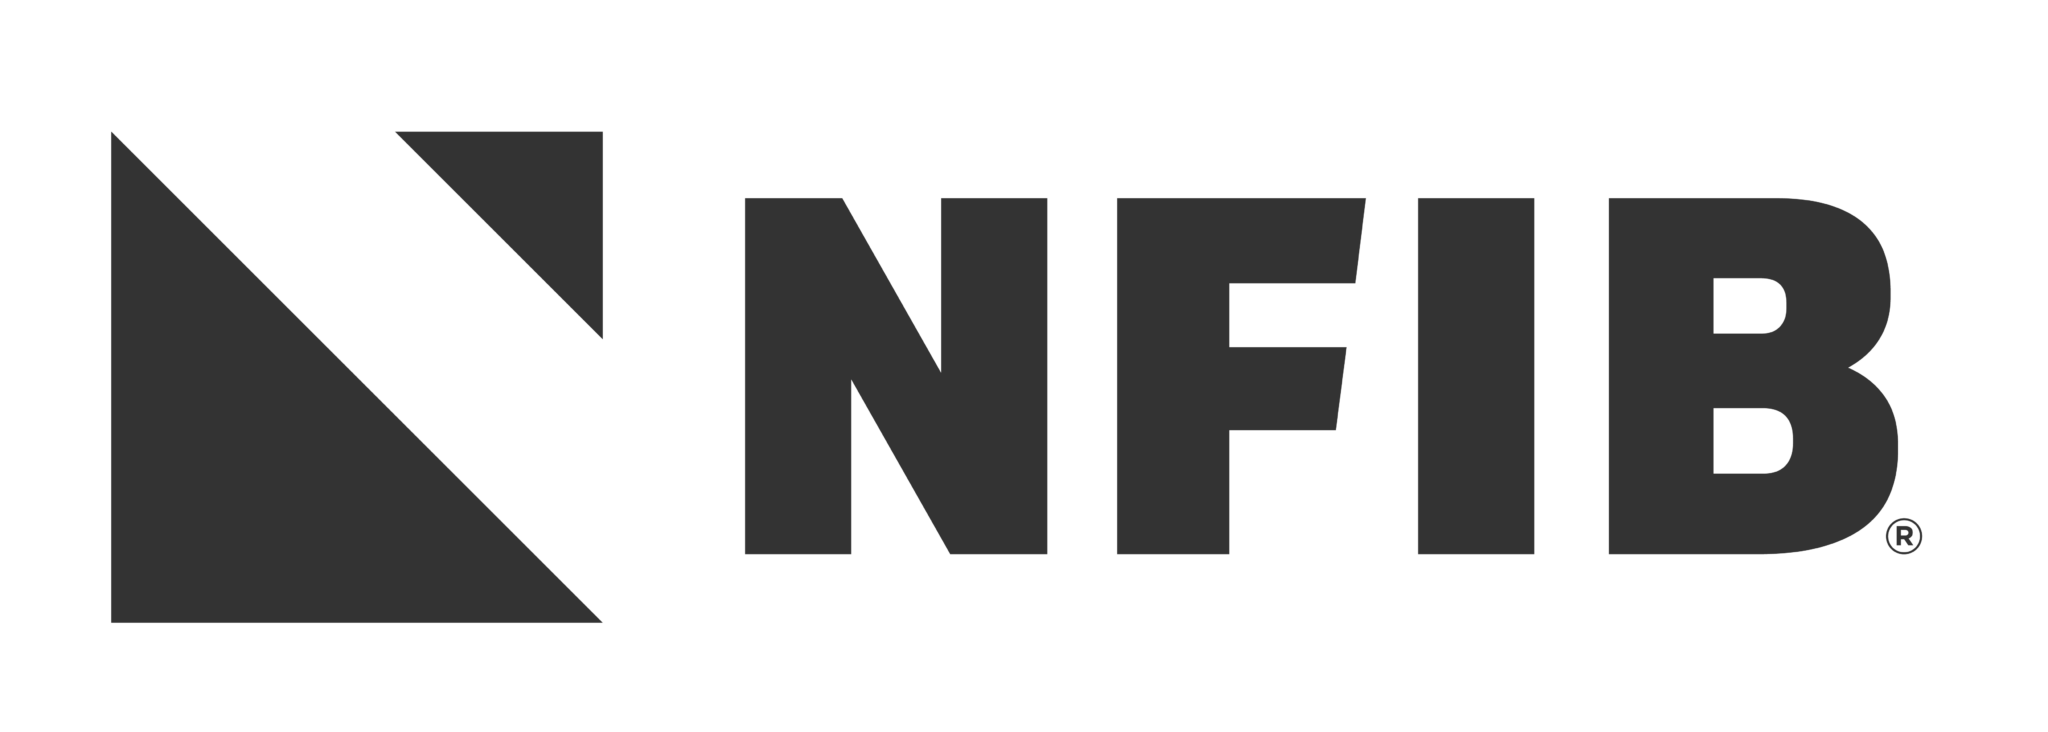 National Federation of Independent Business logo. "NFIB" is in black block letters and beside the "N" is one large triangle and one small triangle that look like they form a box with an empty space in the center.